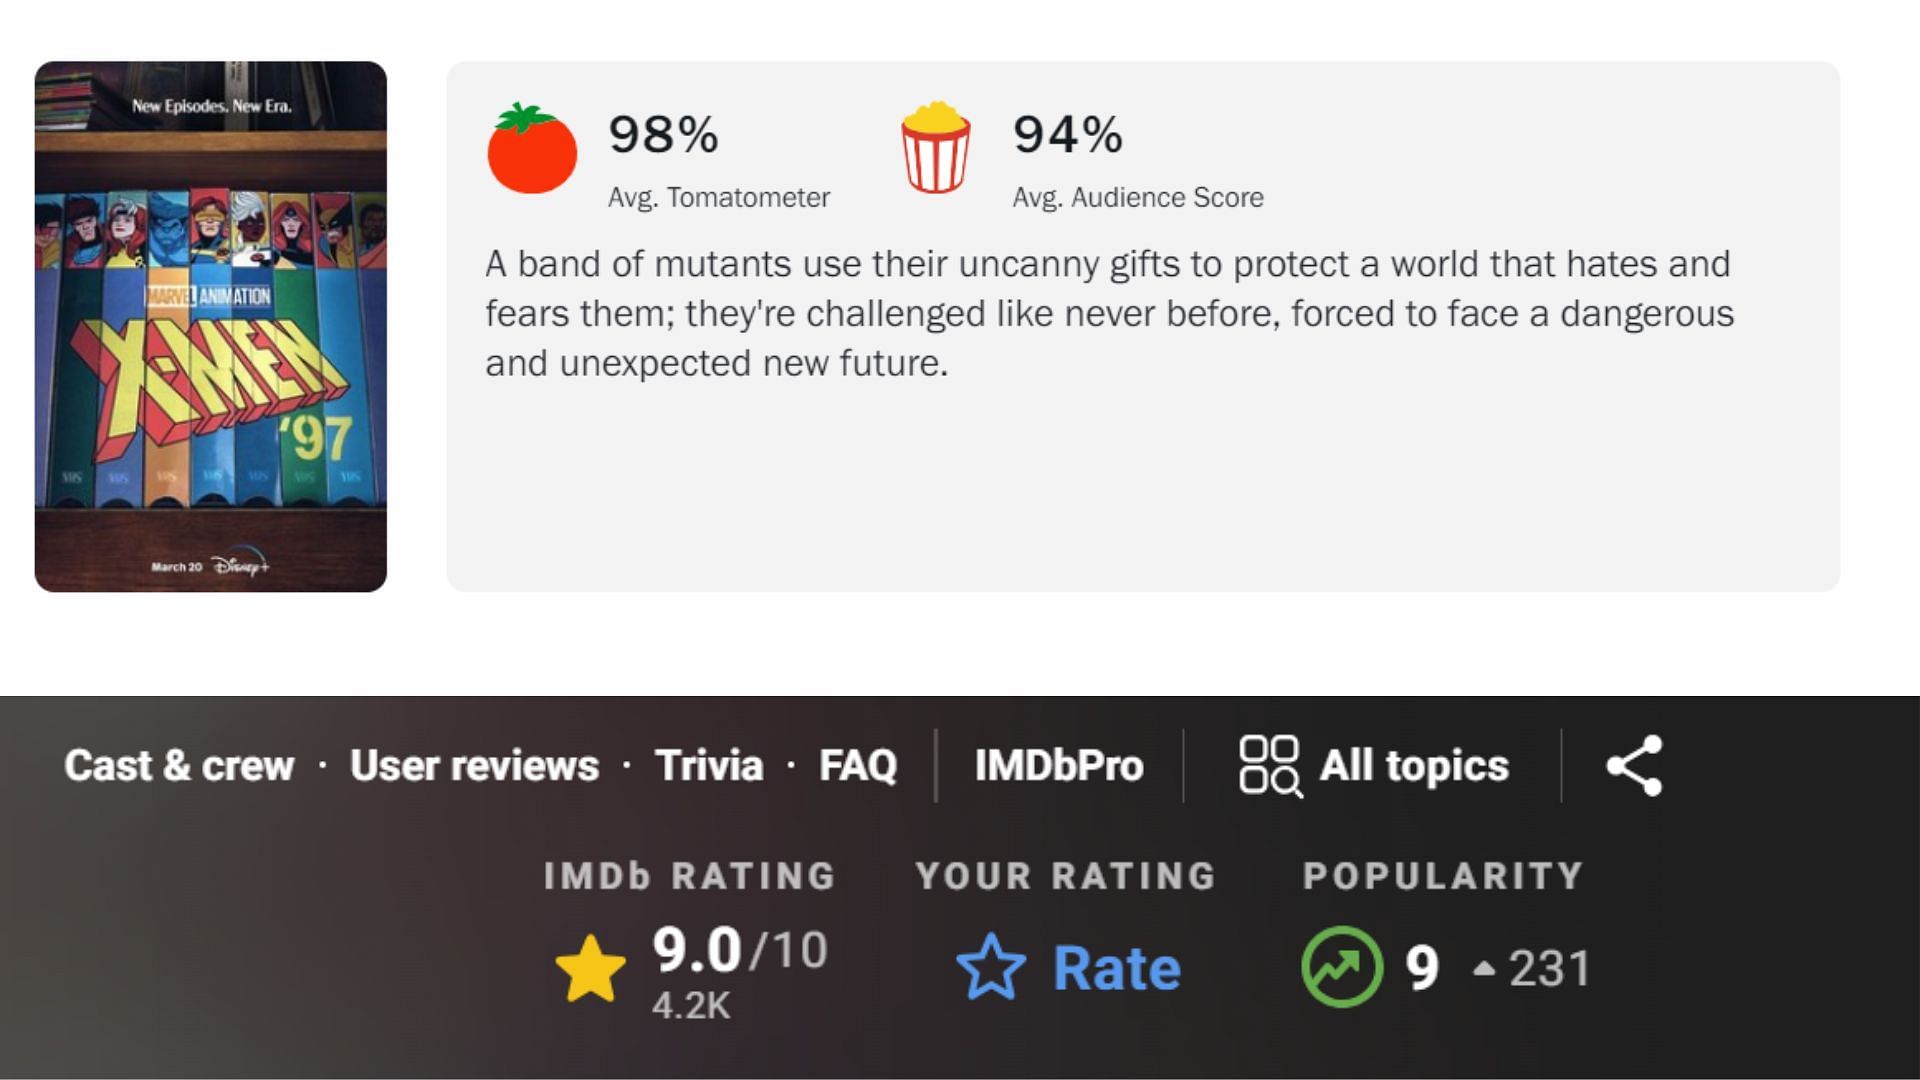 The series has been rated highly by most reviewing sites (Image via Rotten Tomatoes and IMDb)